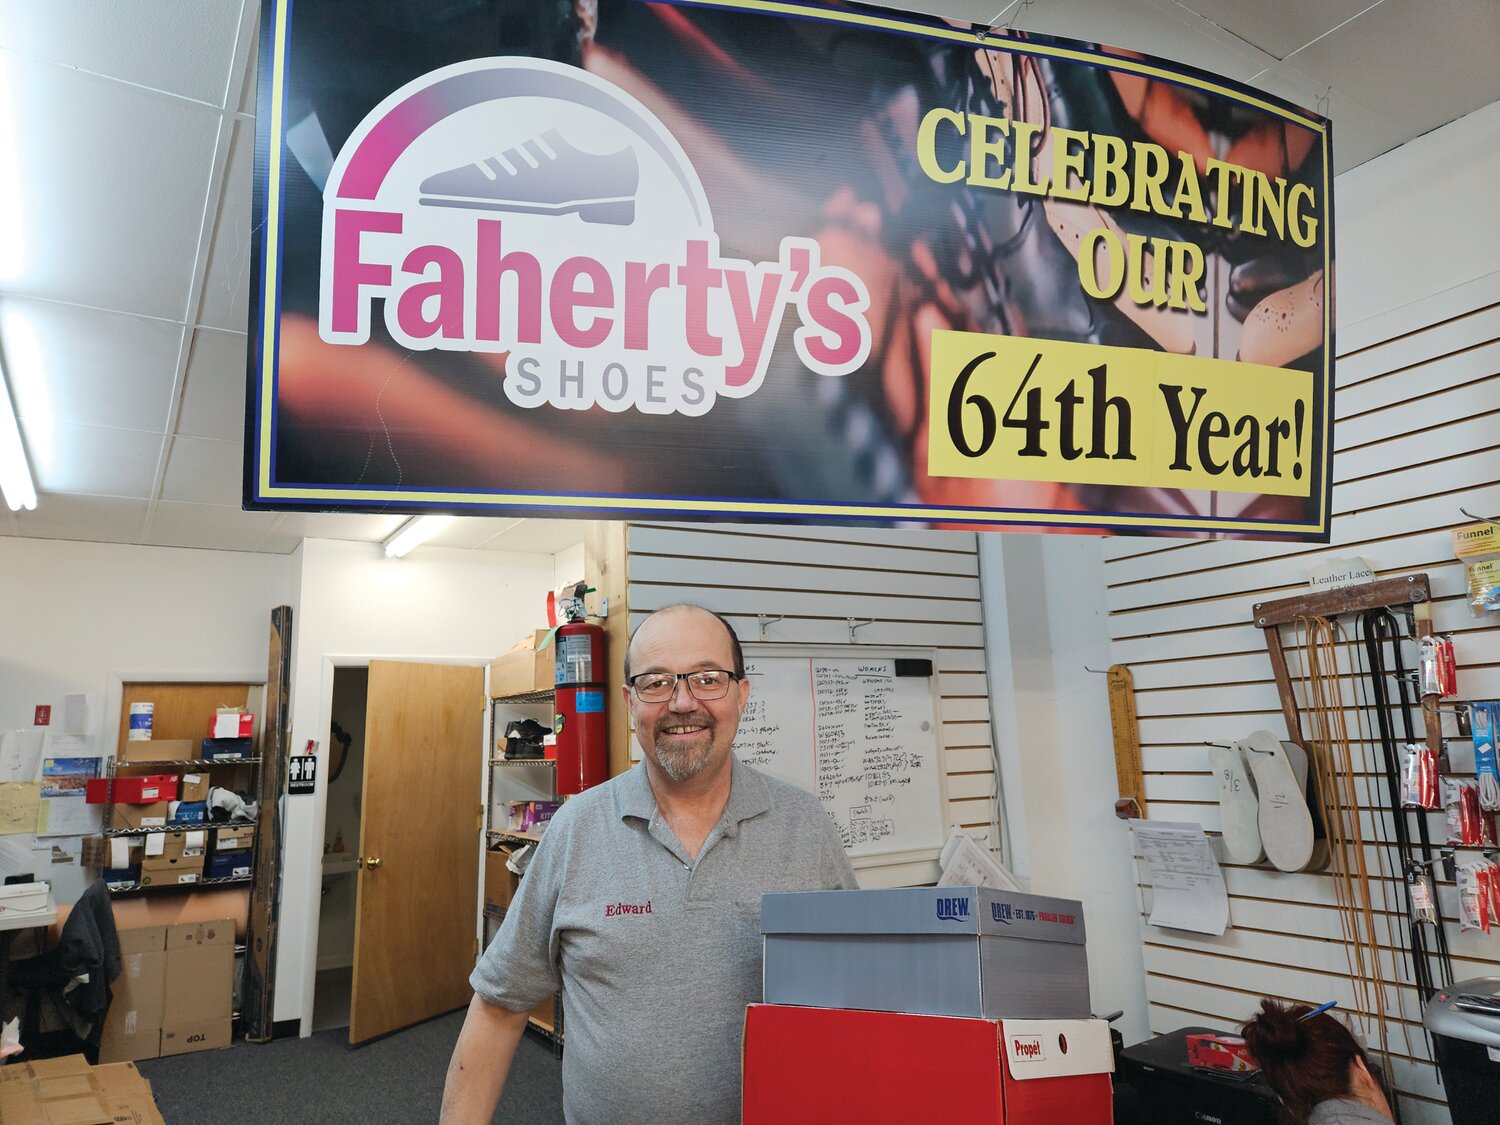 The Faherty family business had been fitting feet for six decades.